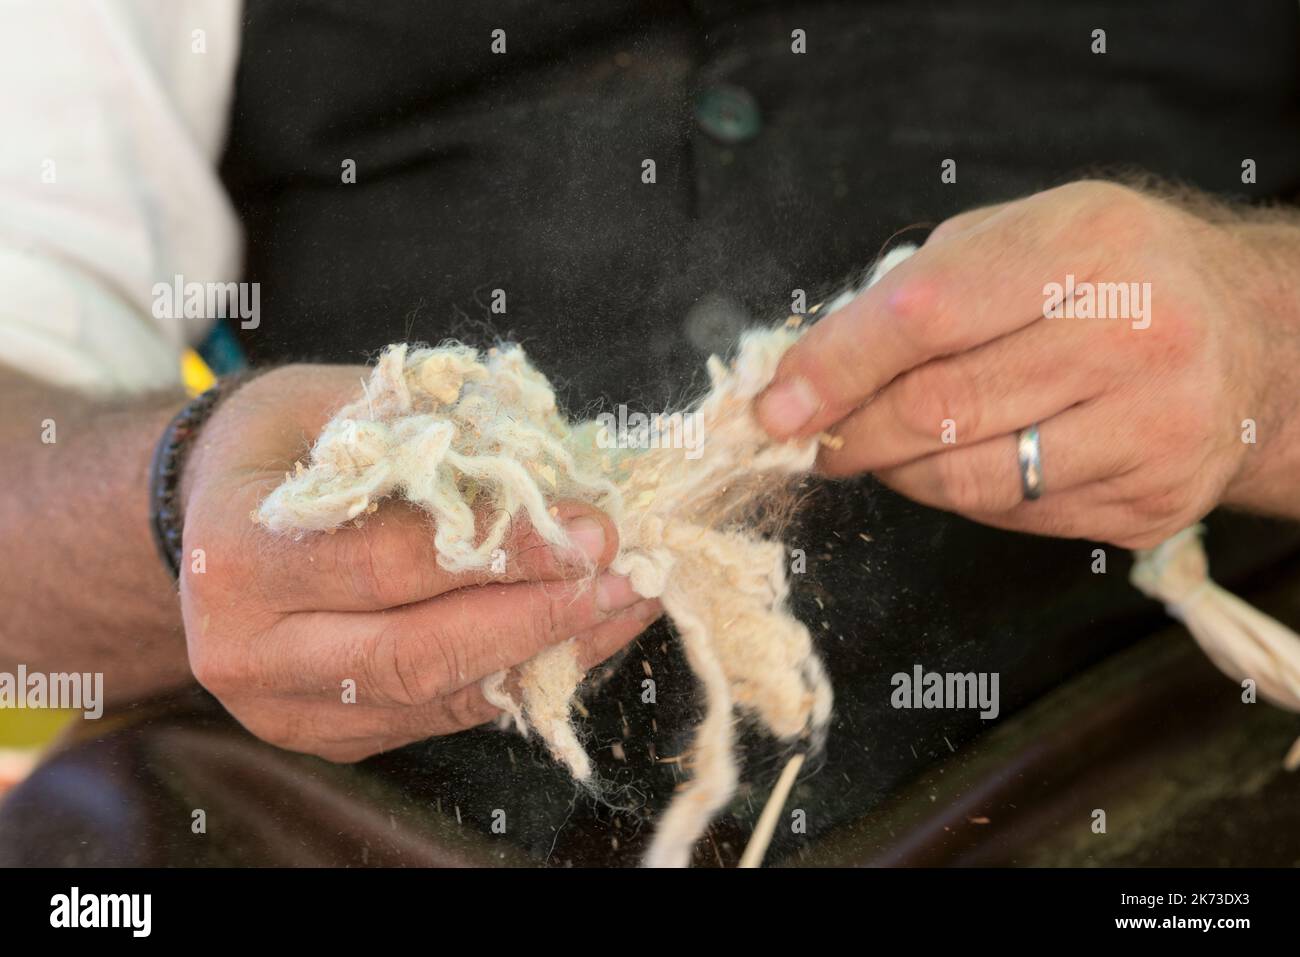 Italy, Lombardy, Historical Reenactment Farmer,  Man Hands Holding Unprocessed Raw Pashmina Wool Stock Photo